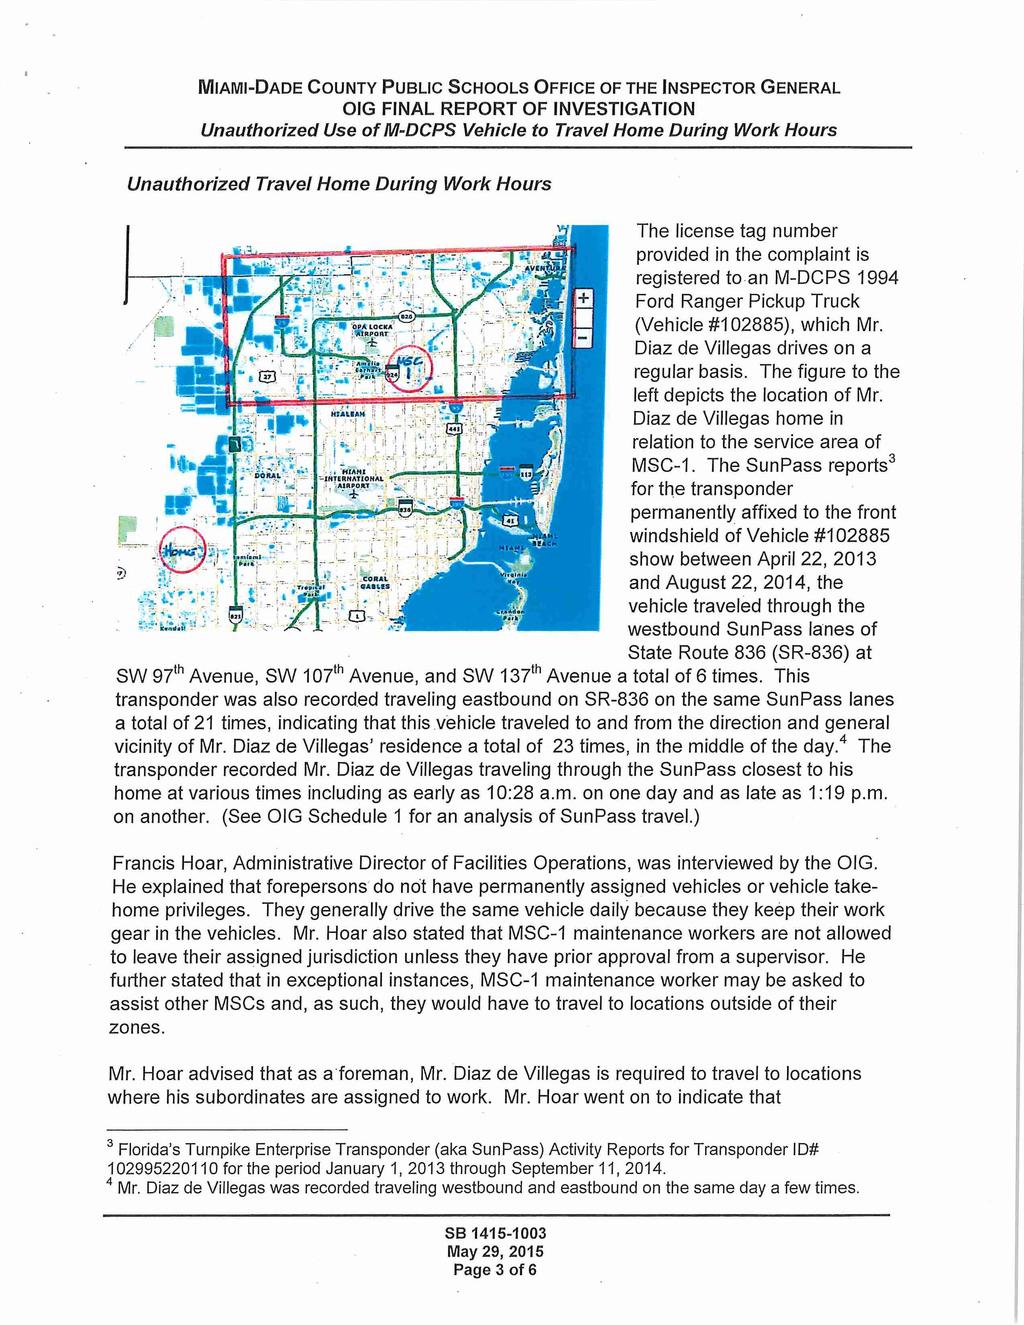 MIAMI-DADE COUNTY PUBLIC SCHOOLS OFFICE OF THE INSPECTOR GENERAL OIG FINAL REPORT OF INVESTIGATION Unauthorized Use of M-DCPS Vehicle to Travel Home During Work Hours Unauthorized Travel Home During